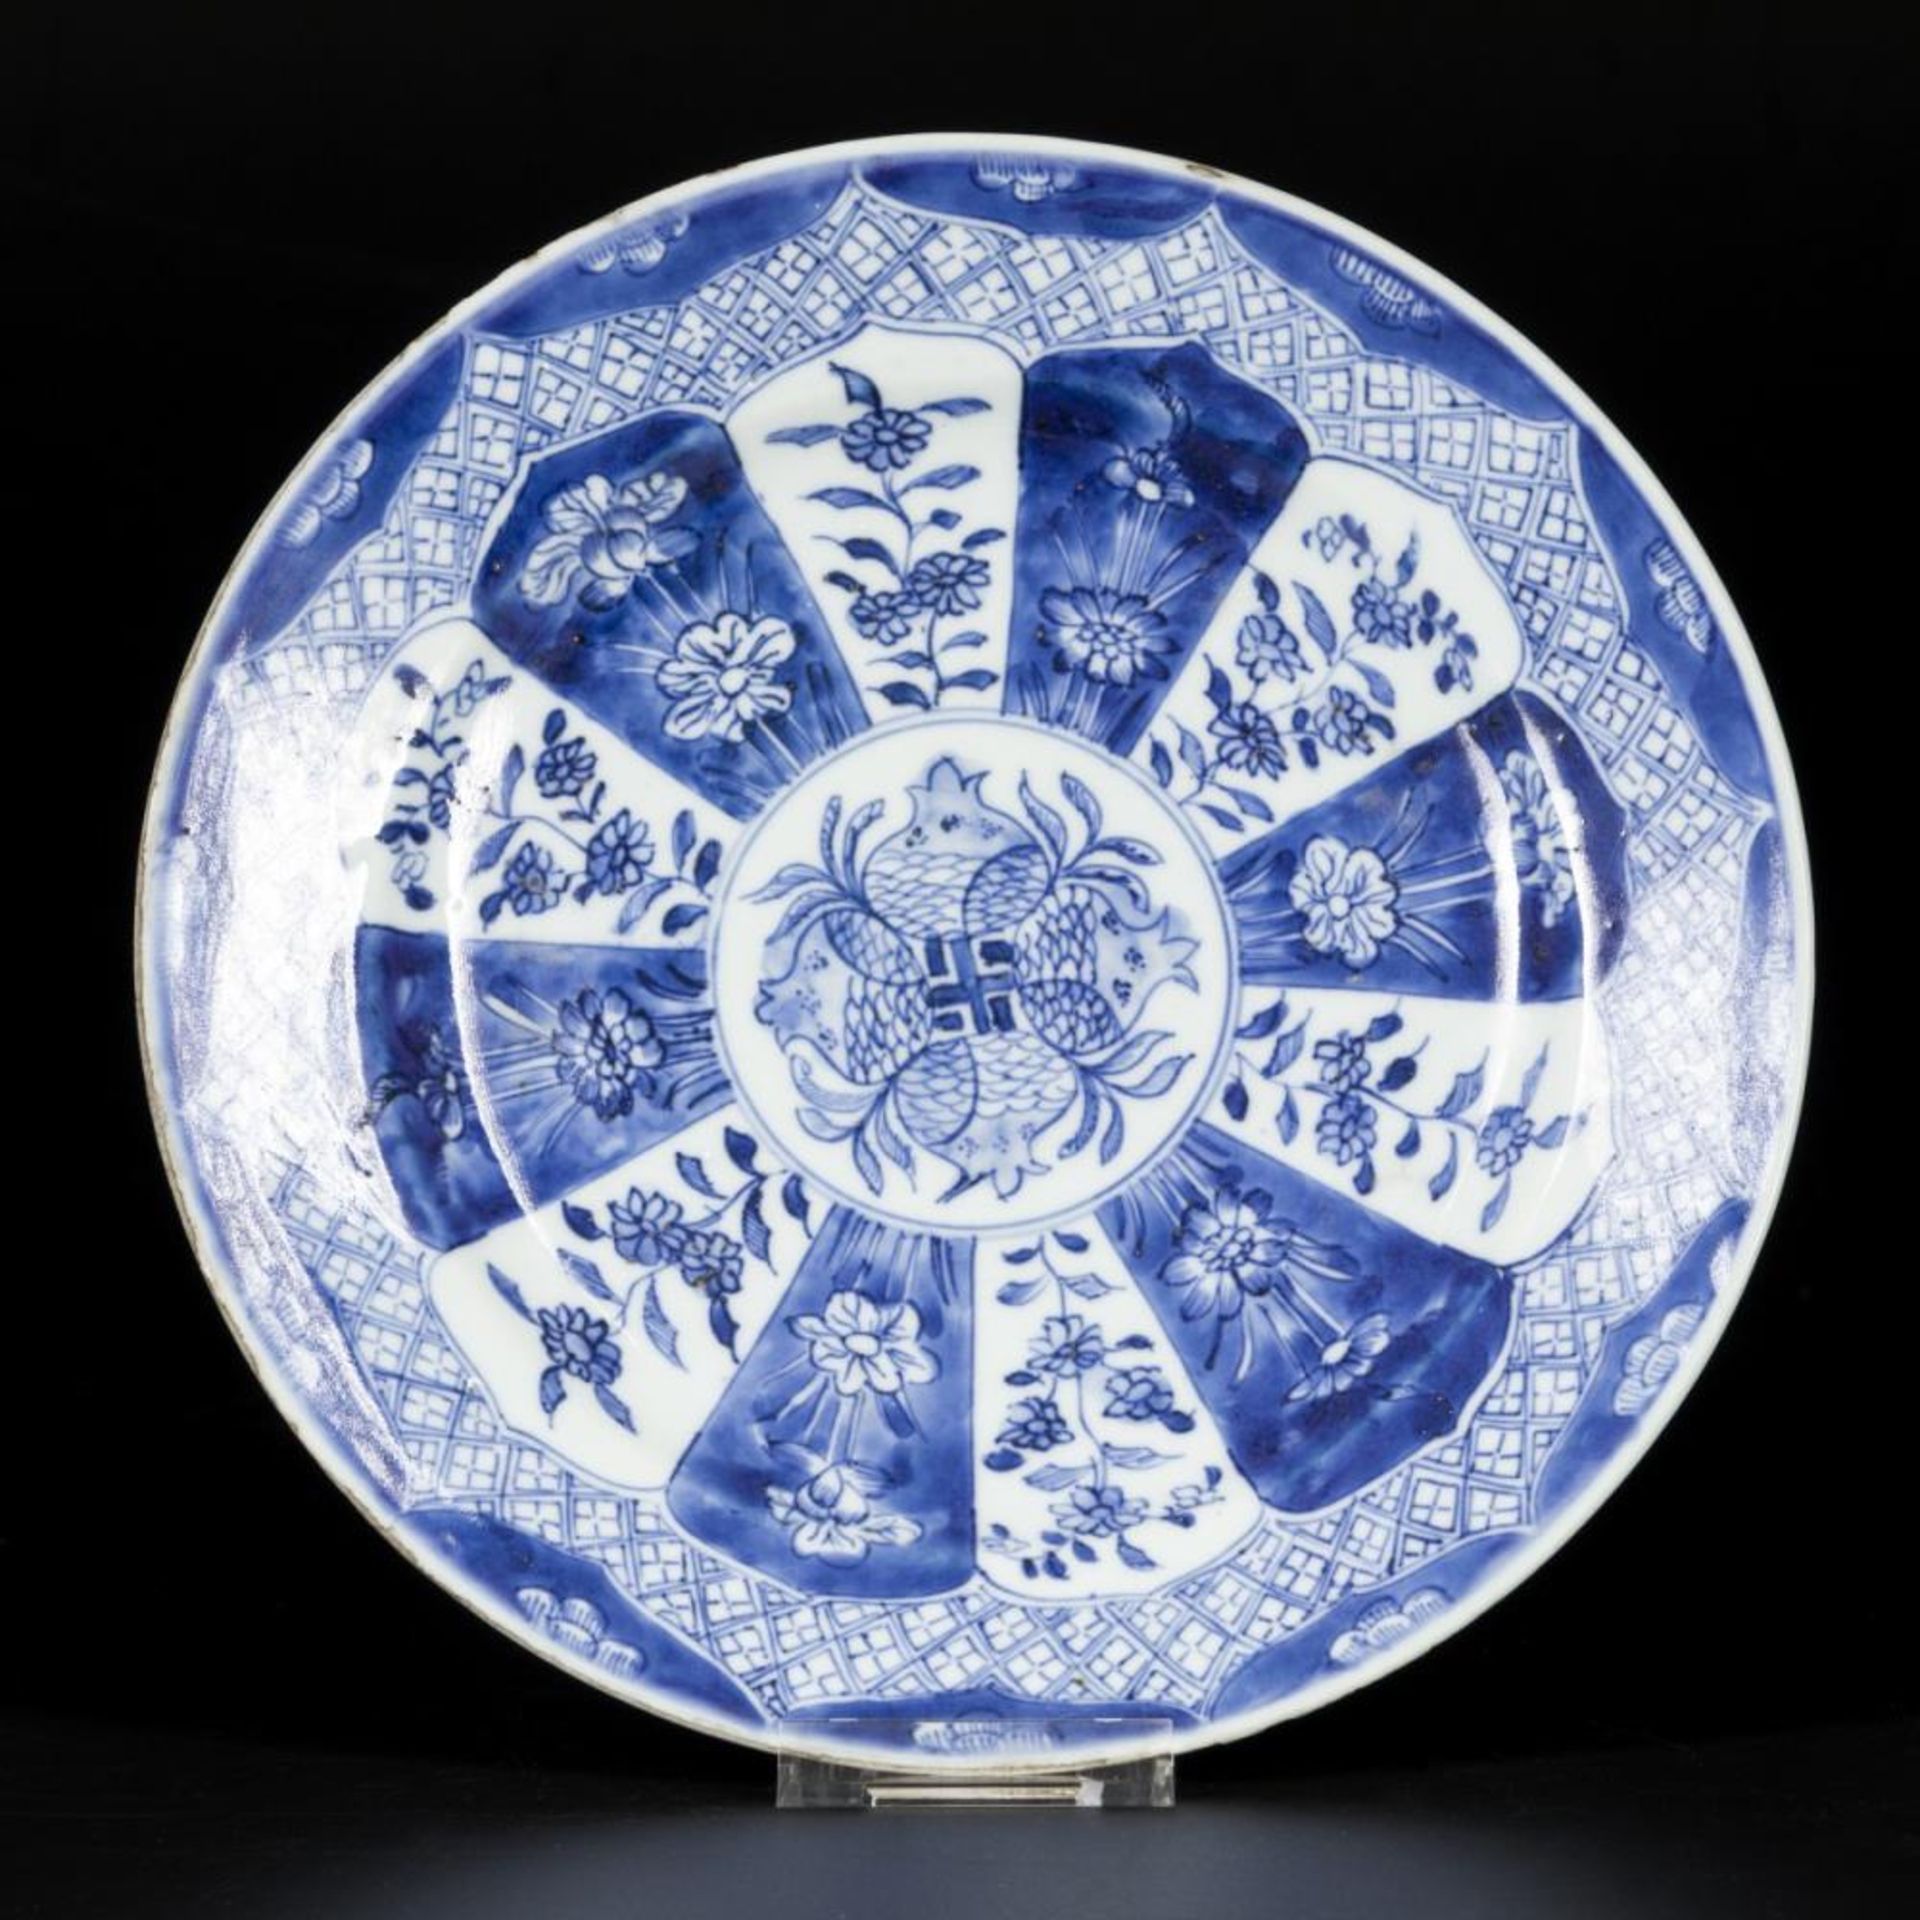 A porcelain plate with lotus leaf decor, pomegranate decor in the center, China, 18th century. - Image 2 of 4